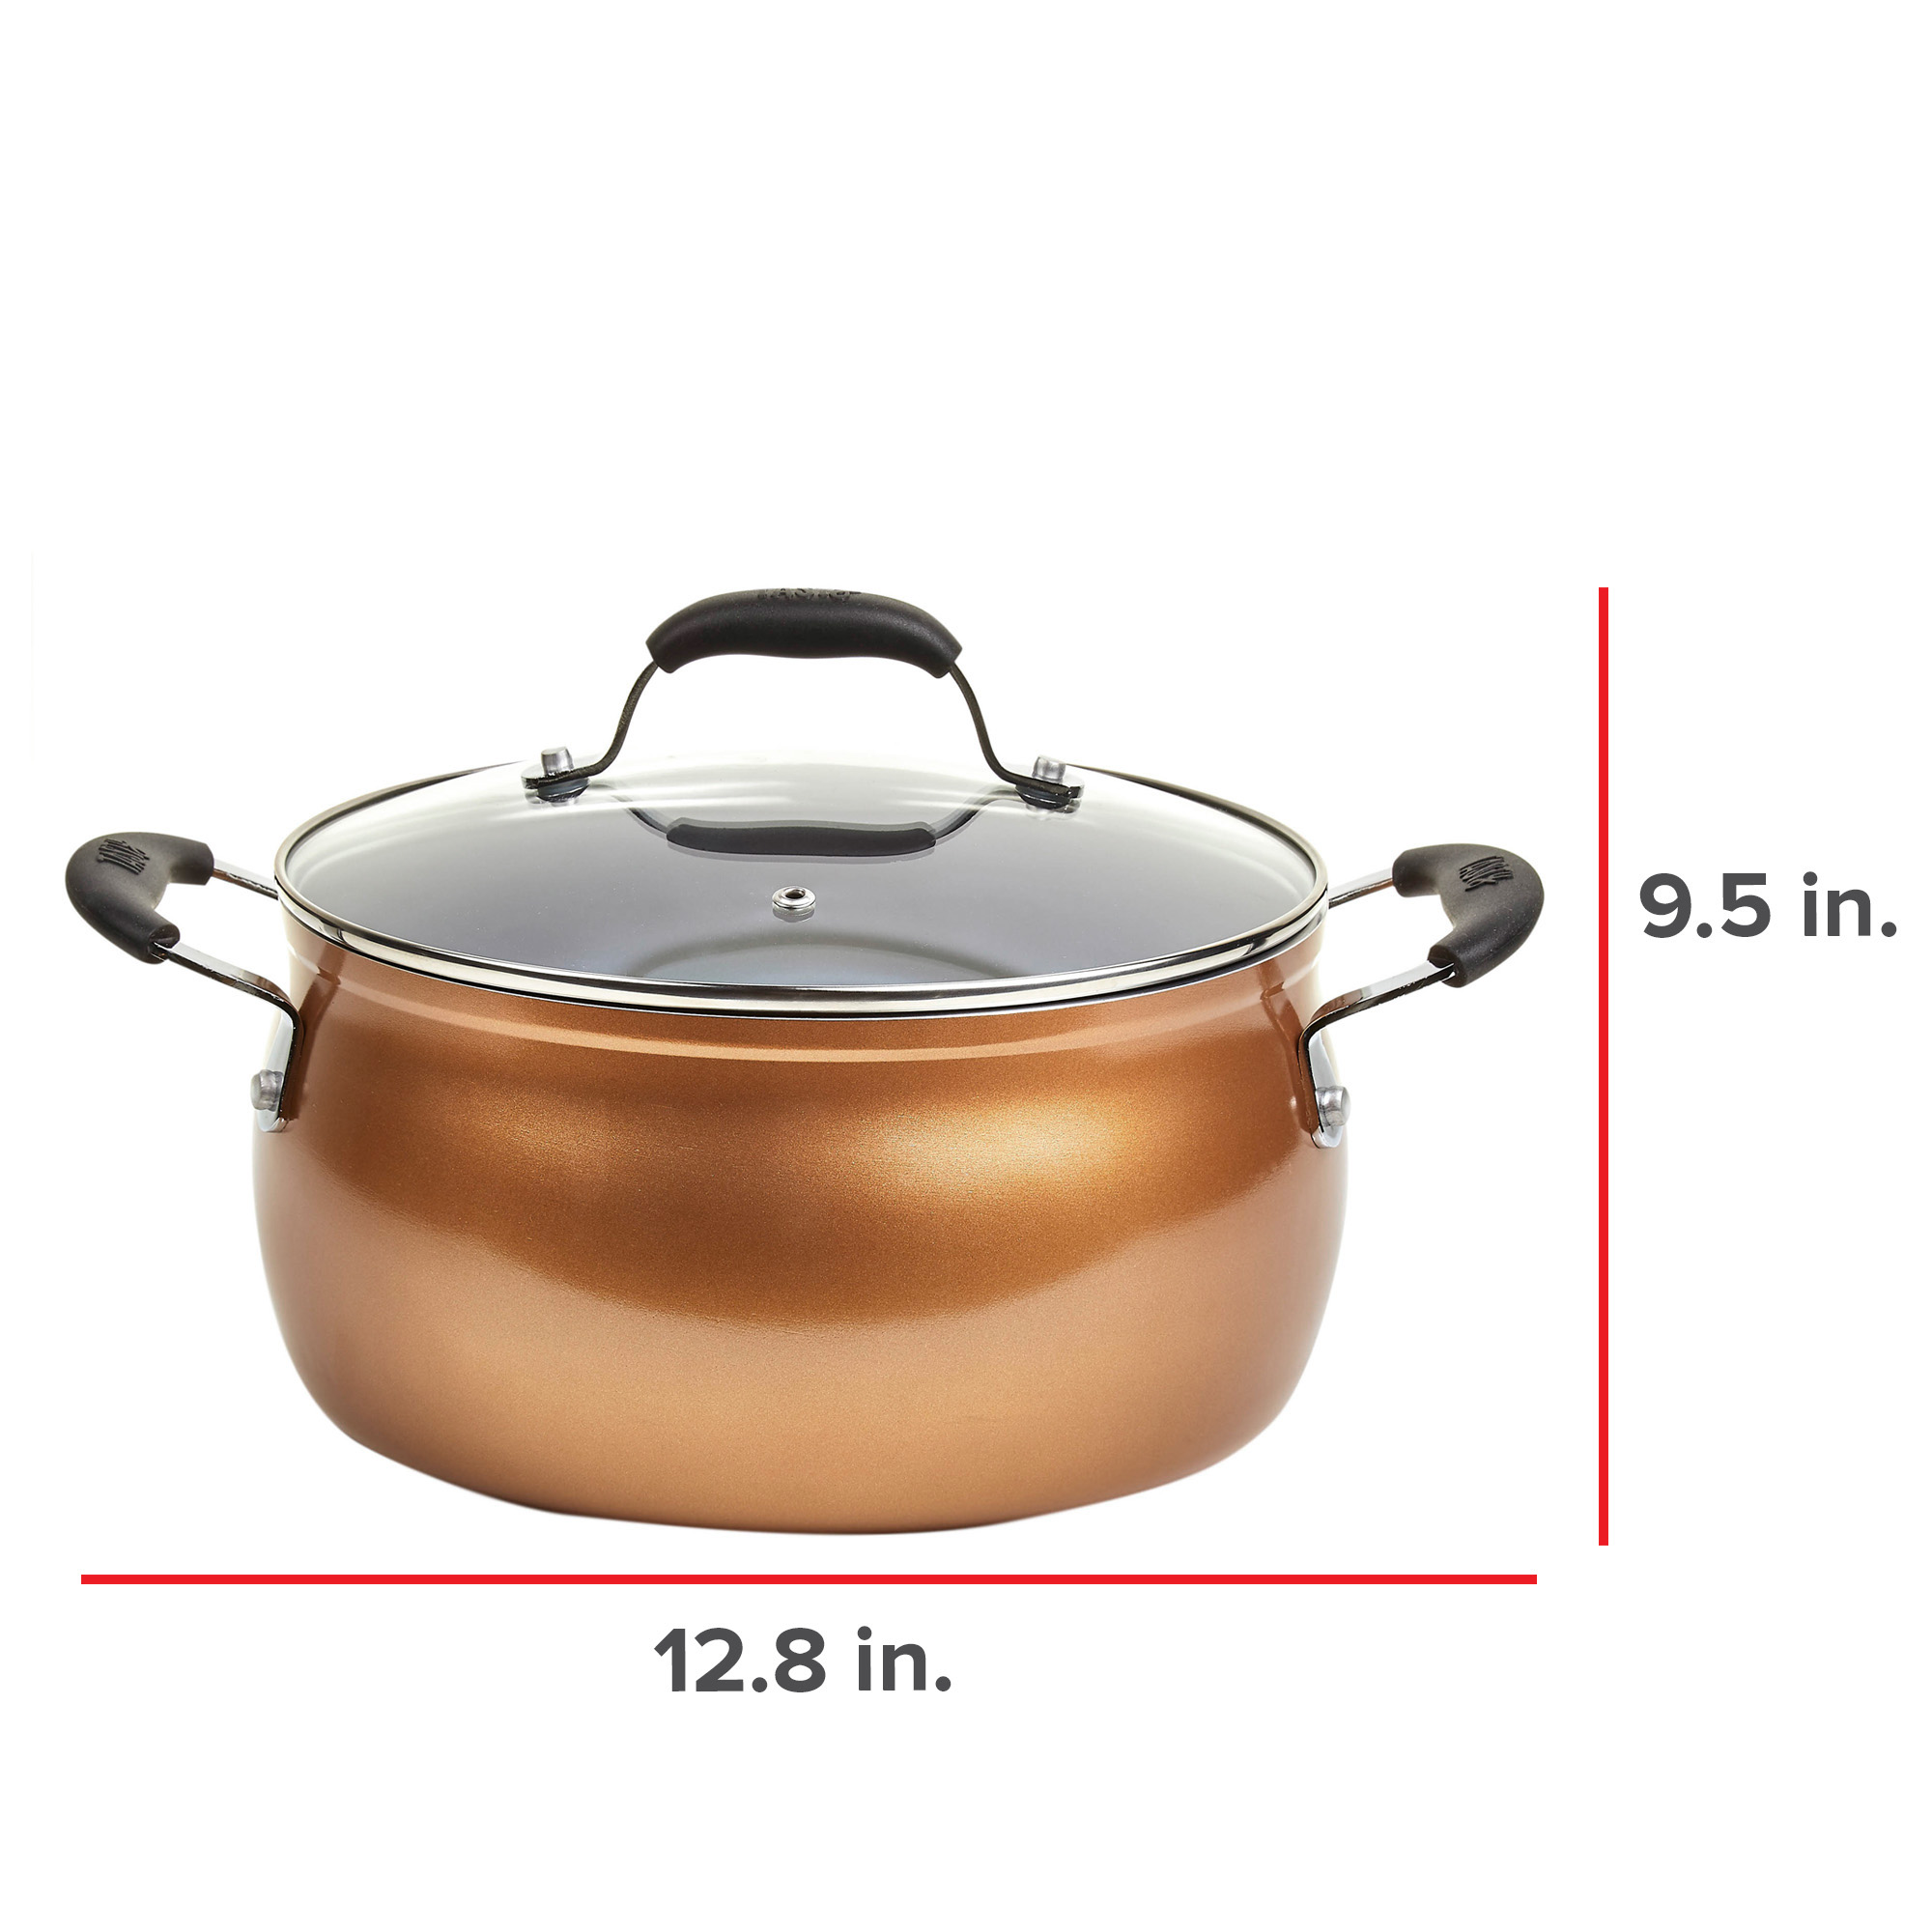 Tasty 5 Quart Non-Stick Dutch Oven with Lid - image 3 of 12